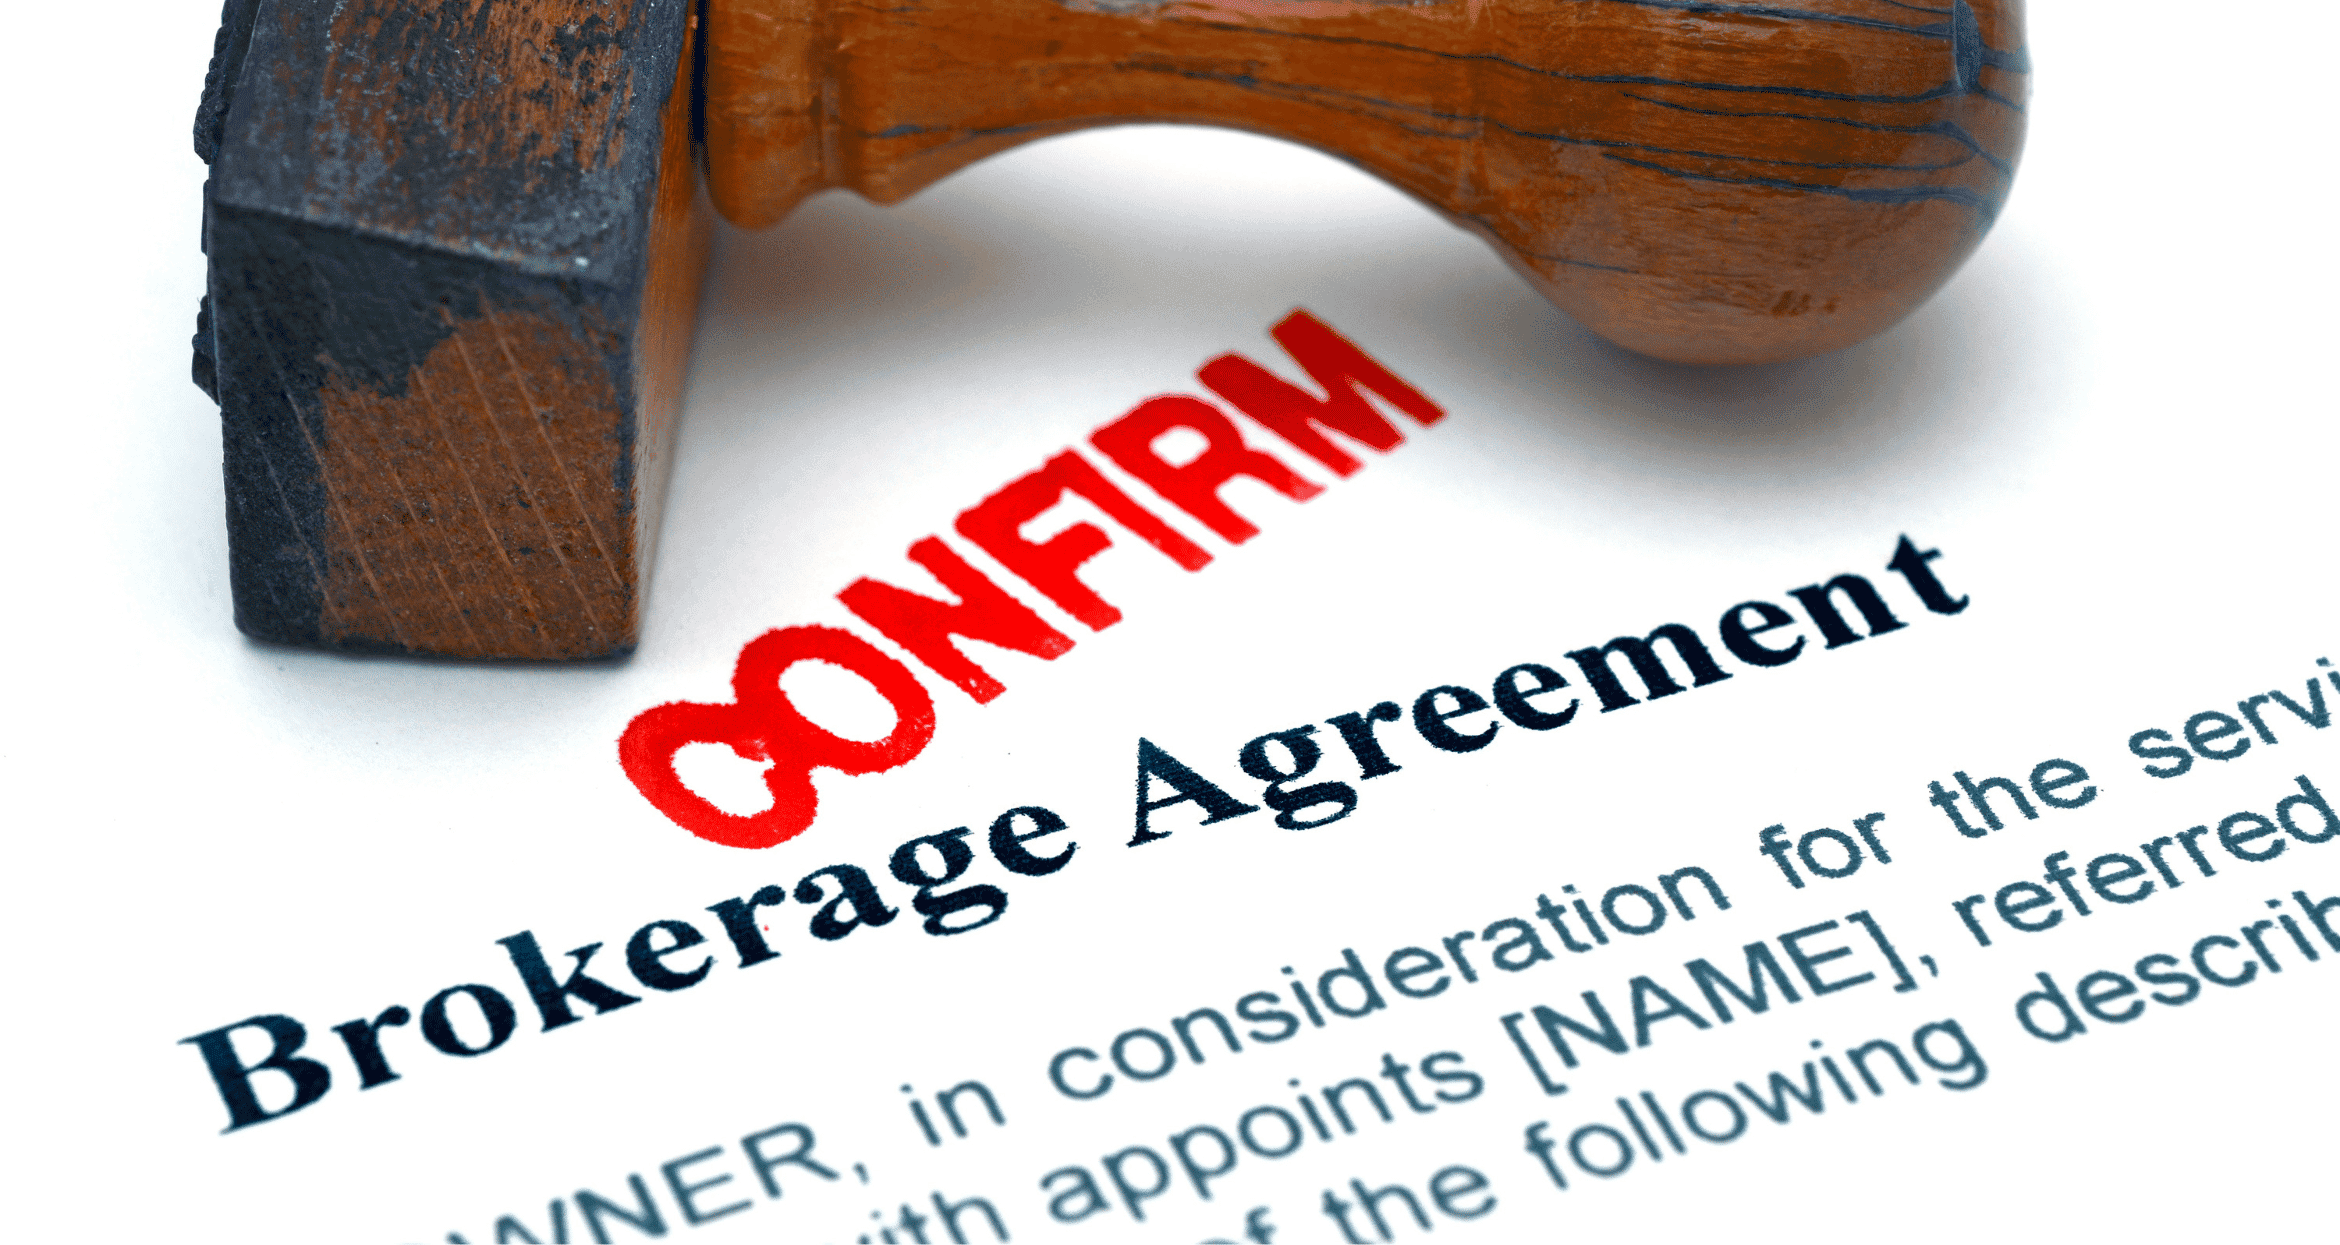 lutheran services in america brokerage agreement